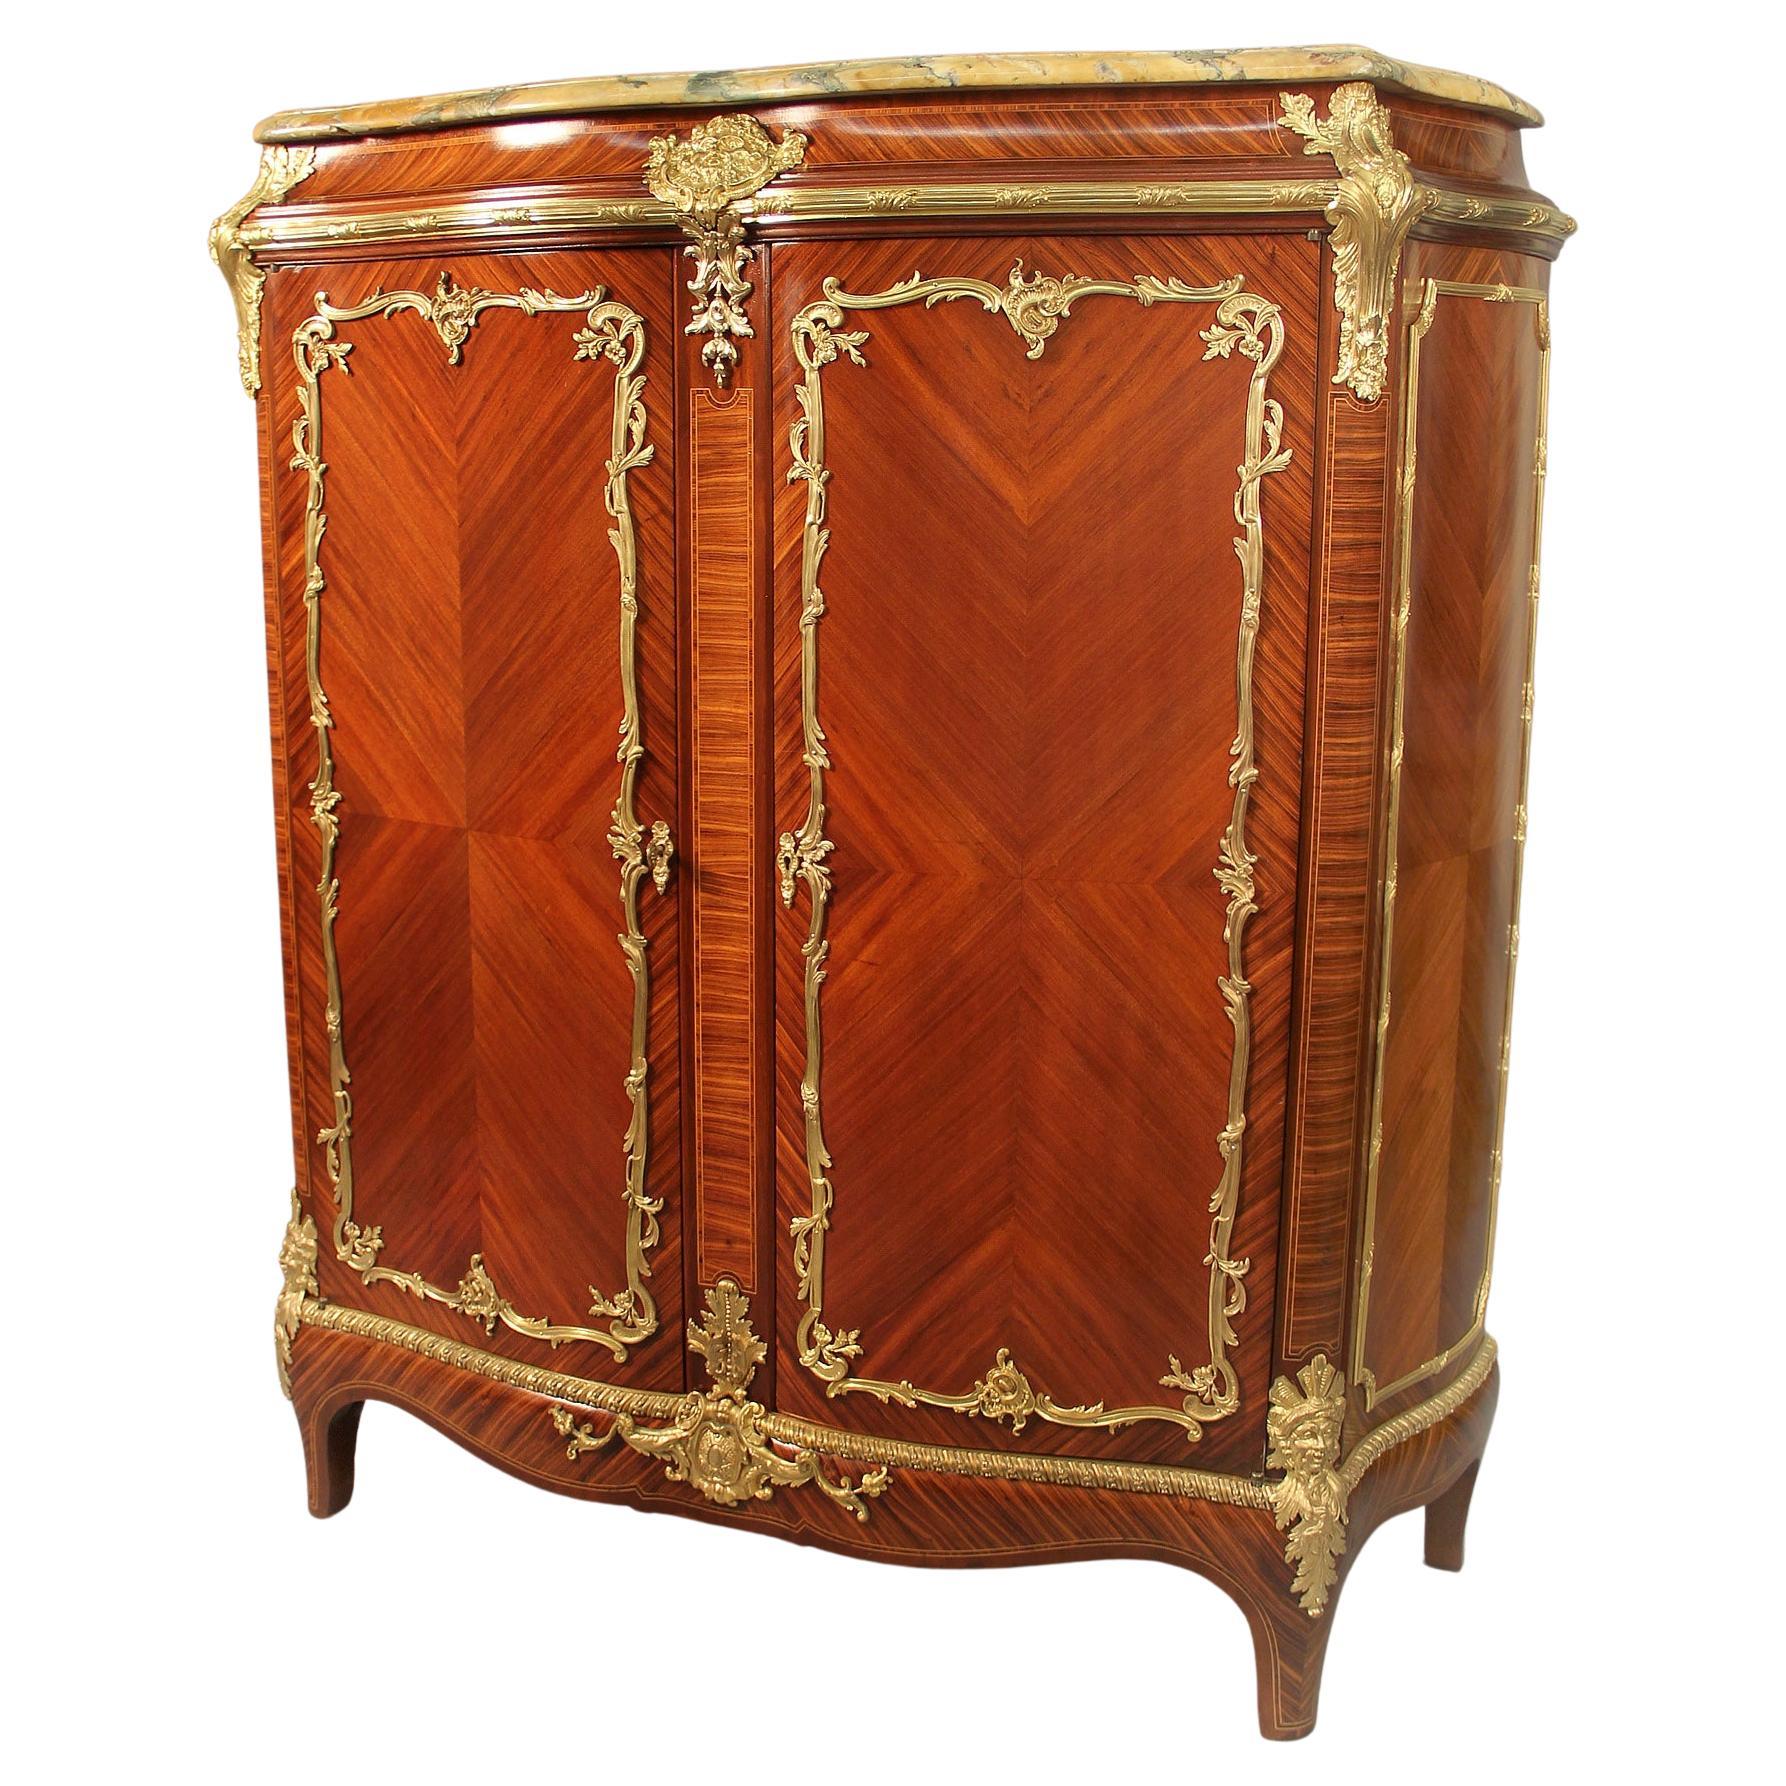 Fine Late 19th Century Gilt Bronze Mounted Tall Cabinet by François Linke